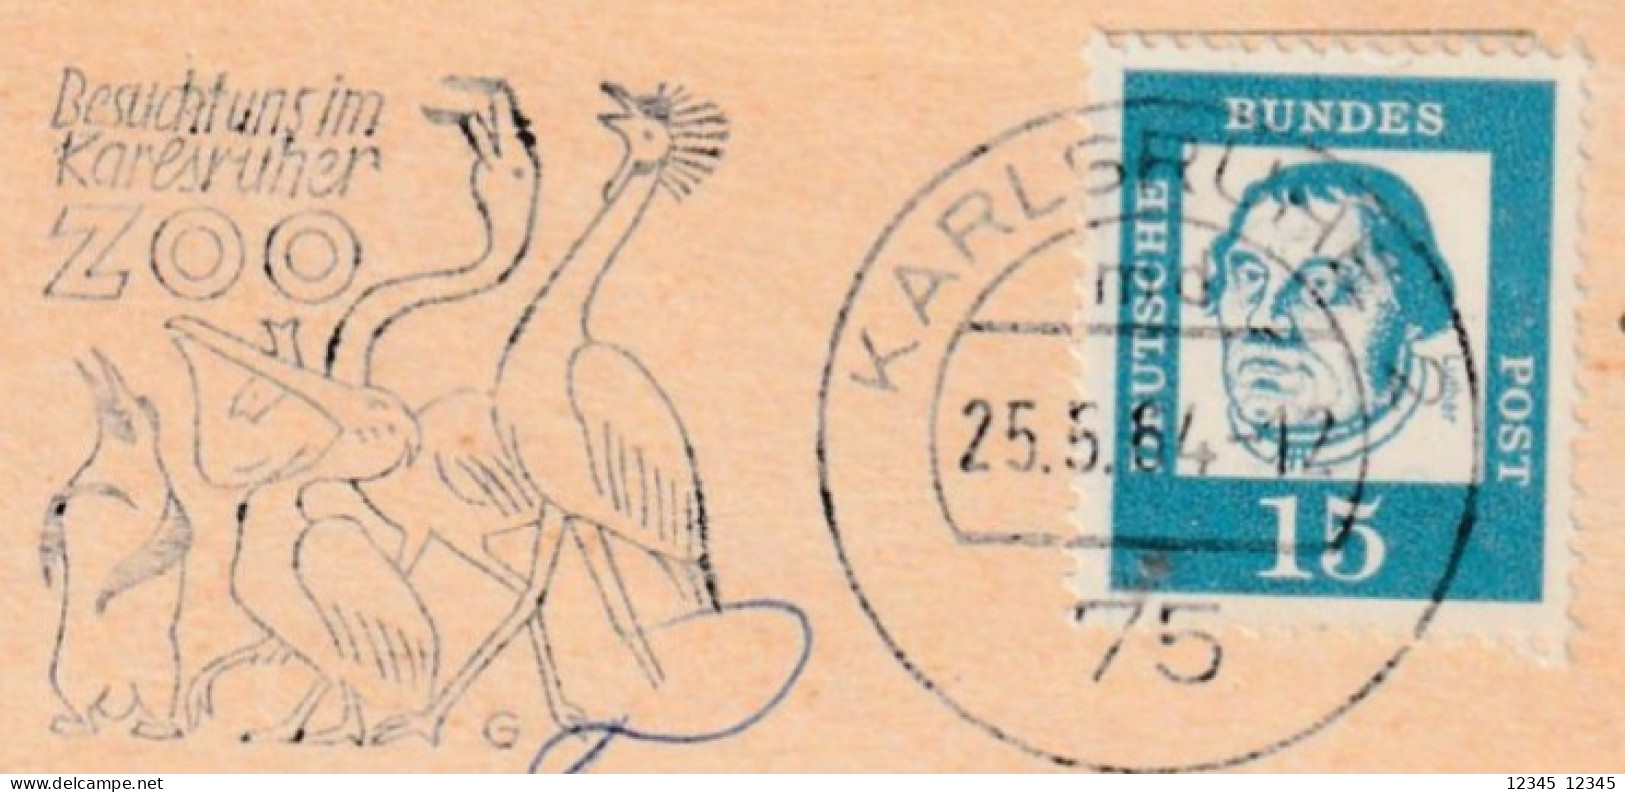 Duitsland 1964, Stamped Bird Motive (Besucht Uns Im Karlsruher Zoo) - Covers & Documents